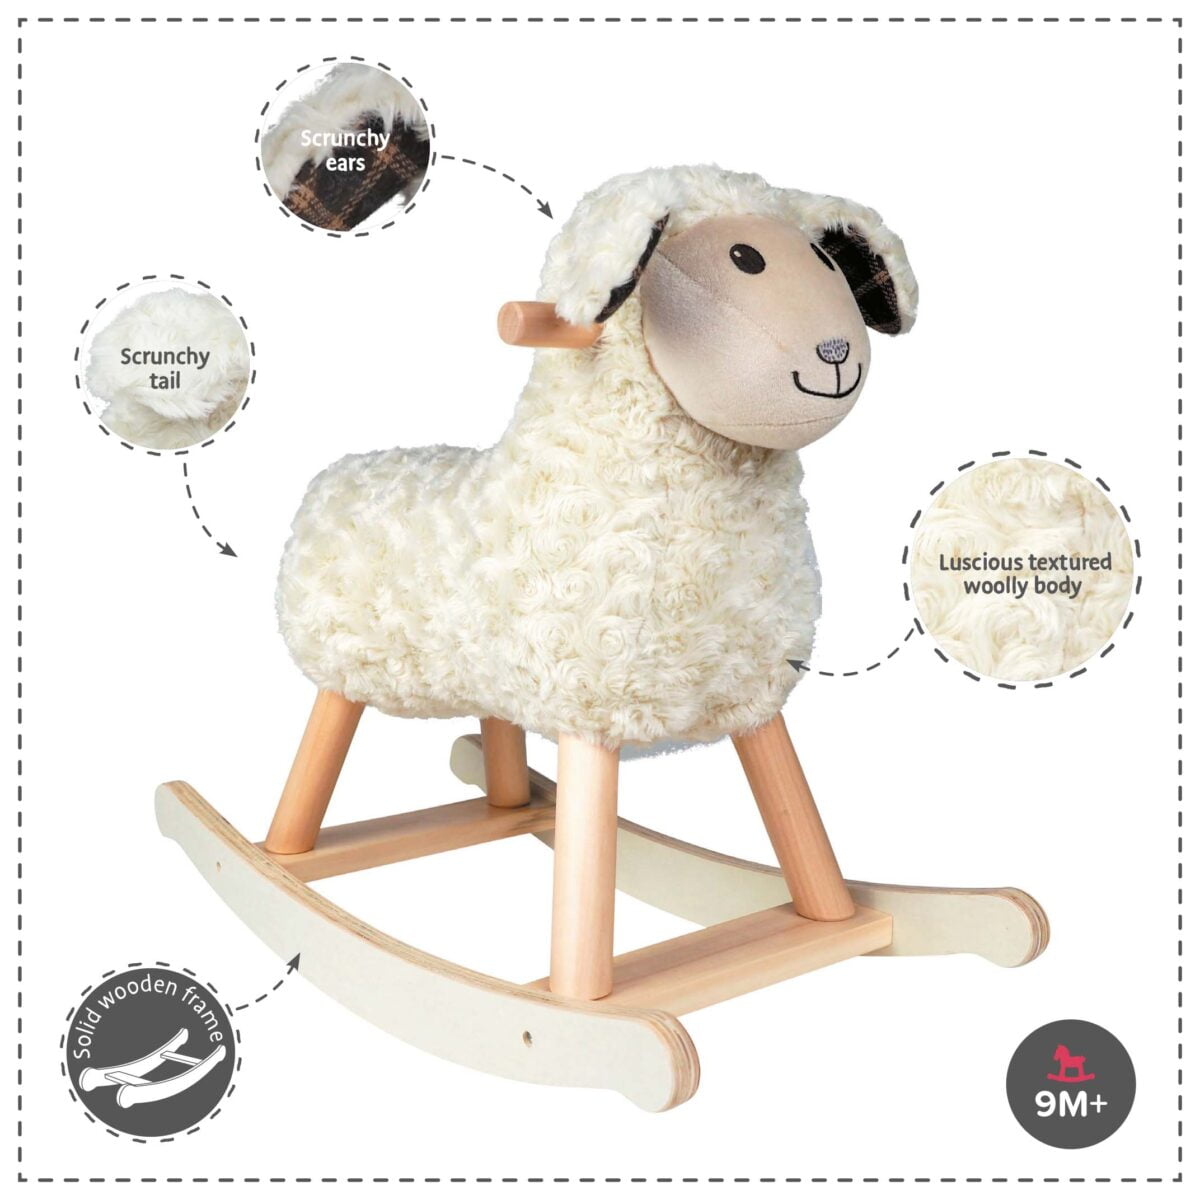 Features and benefits displayed for Lambert Rocking Sheep